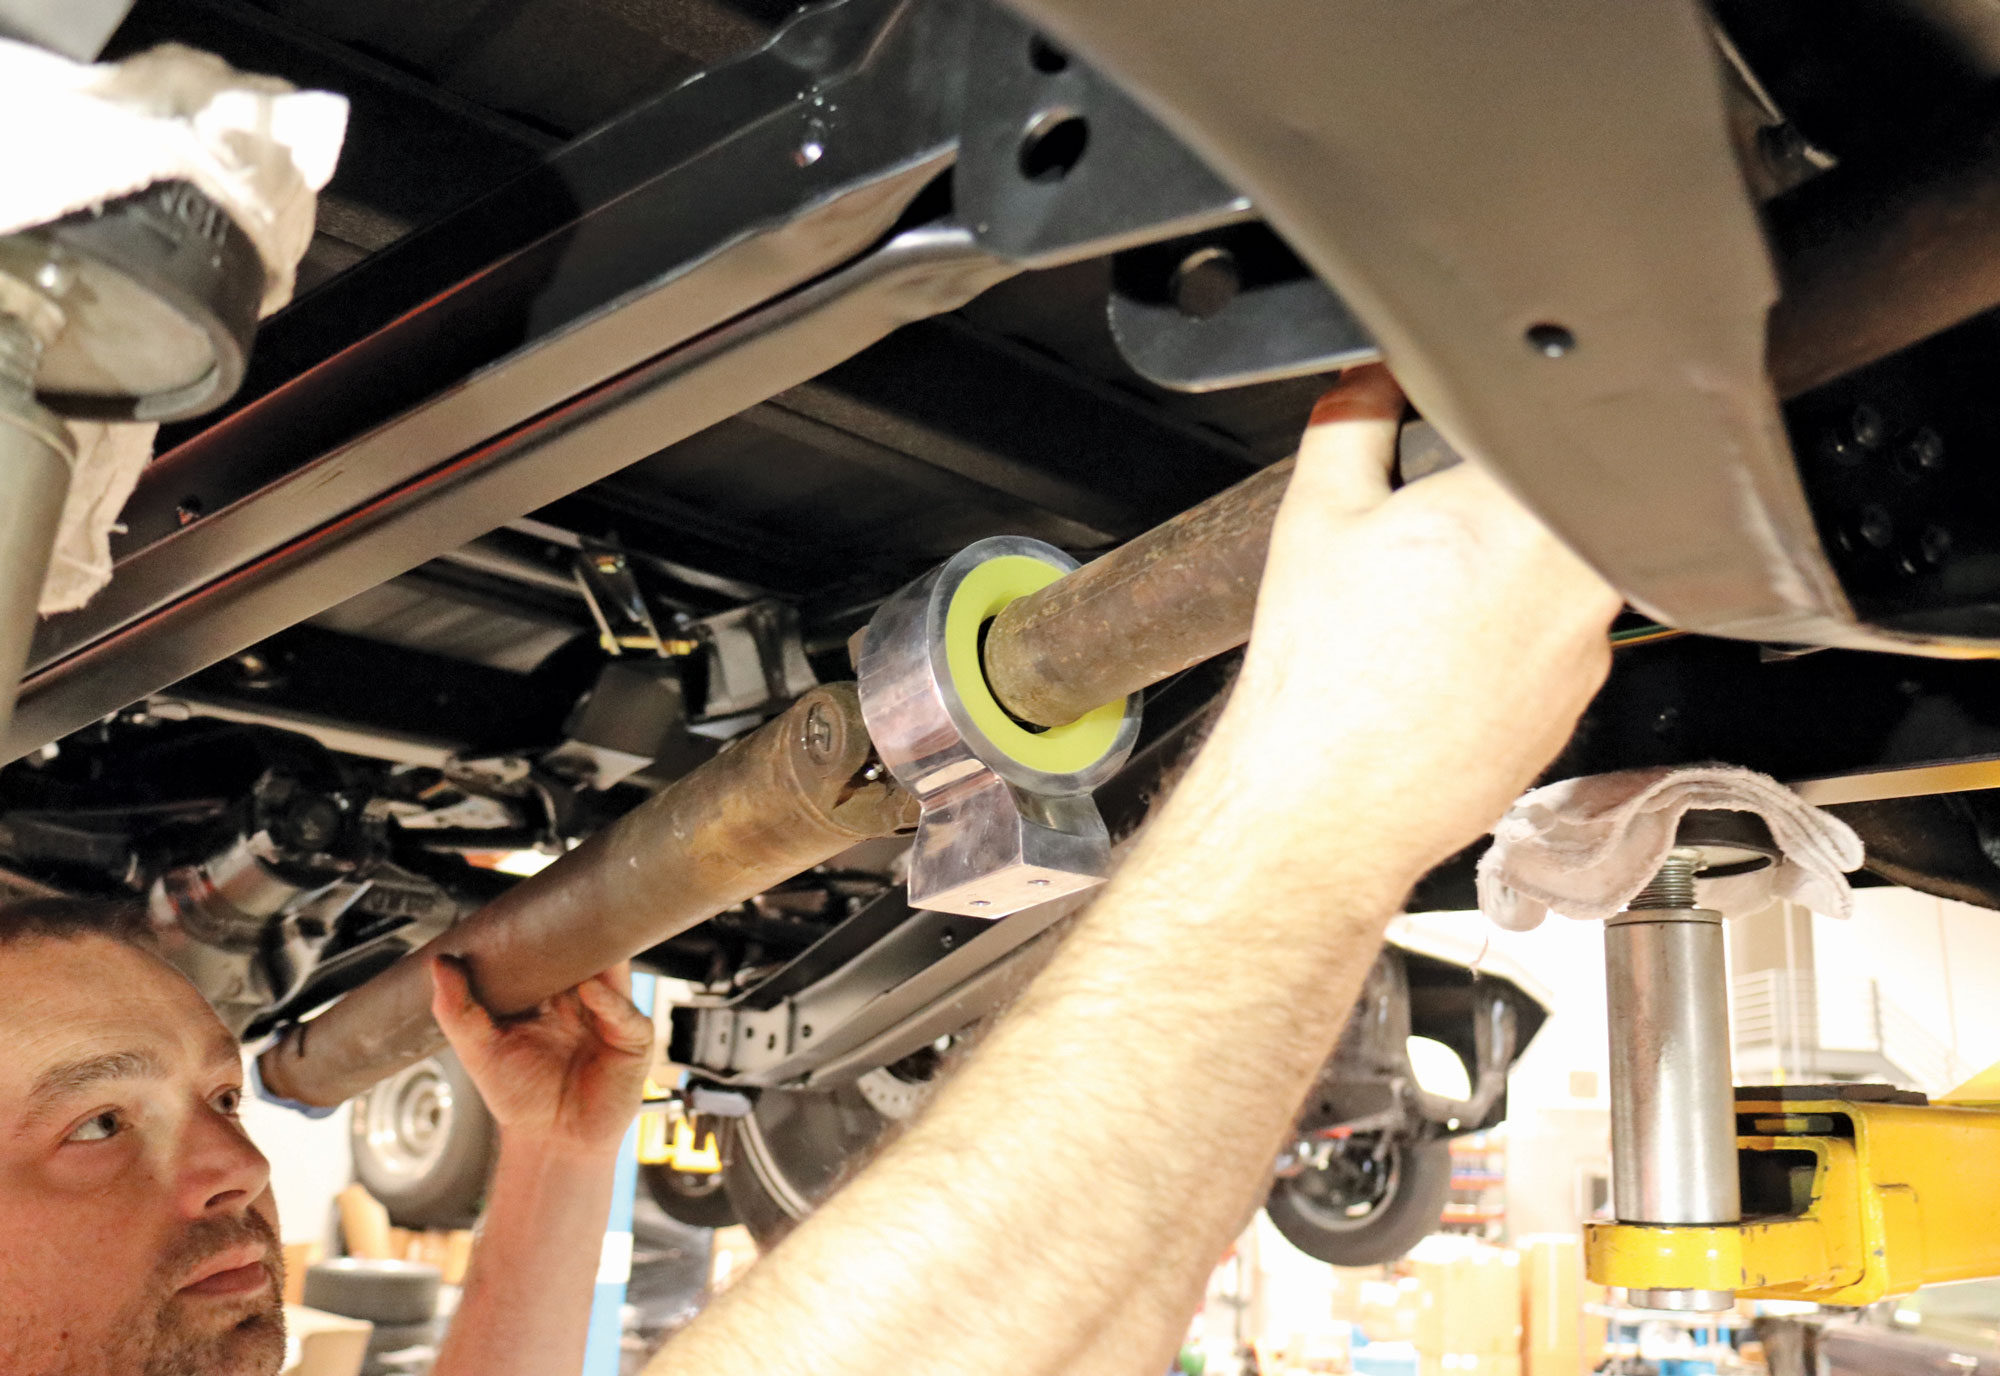 Give Driveline Woes the Slip ... By Installing a CPP Slip Shaft Two-Piece Driveline